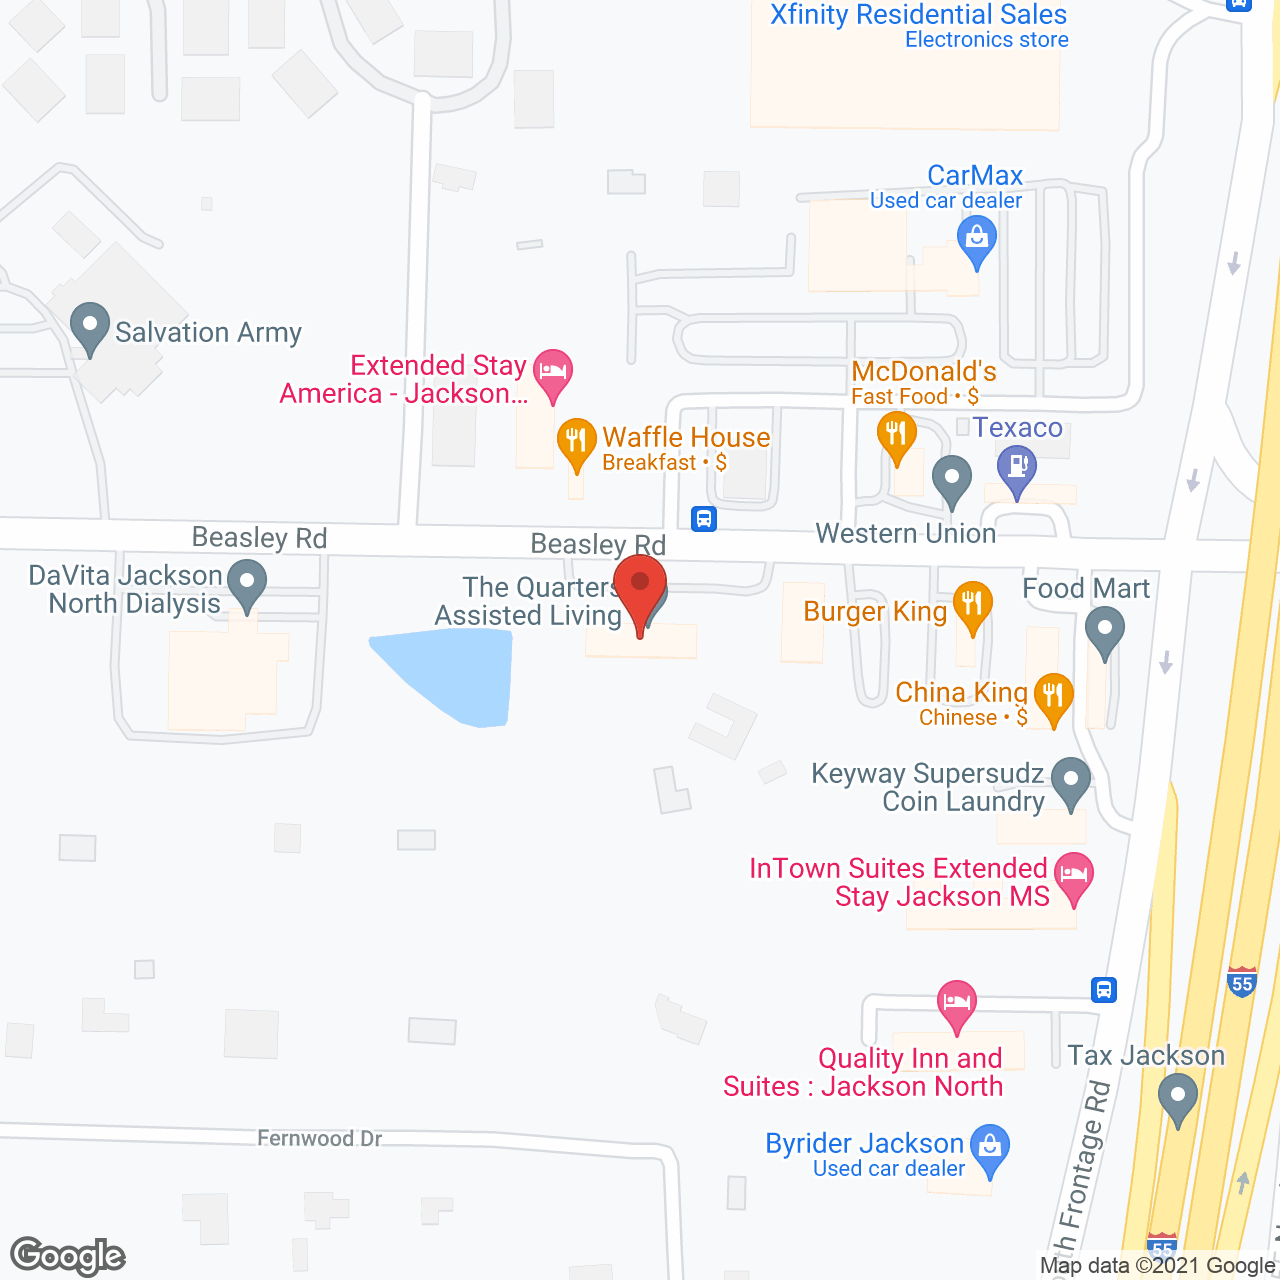 The Quarters Assisted Living in google map